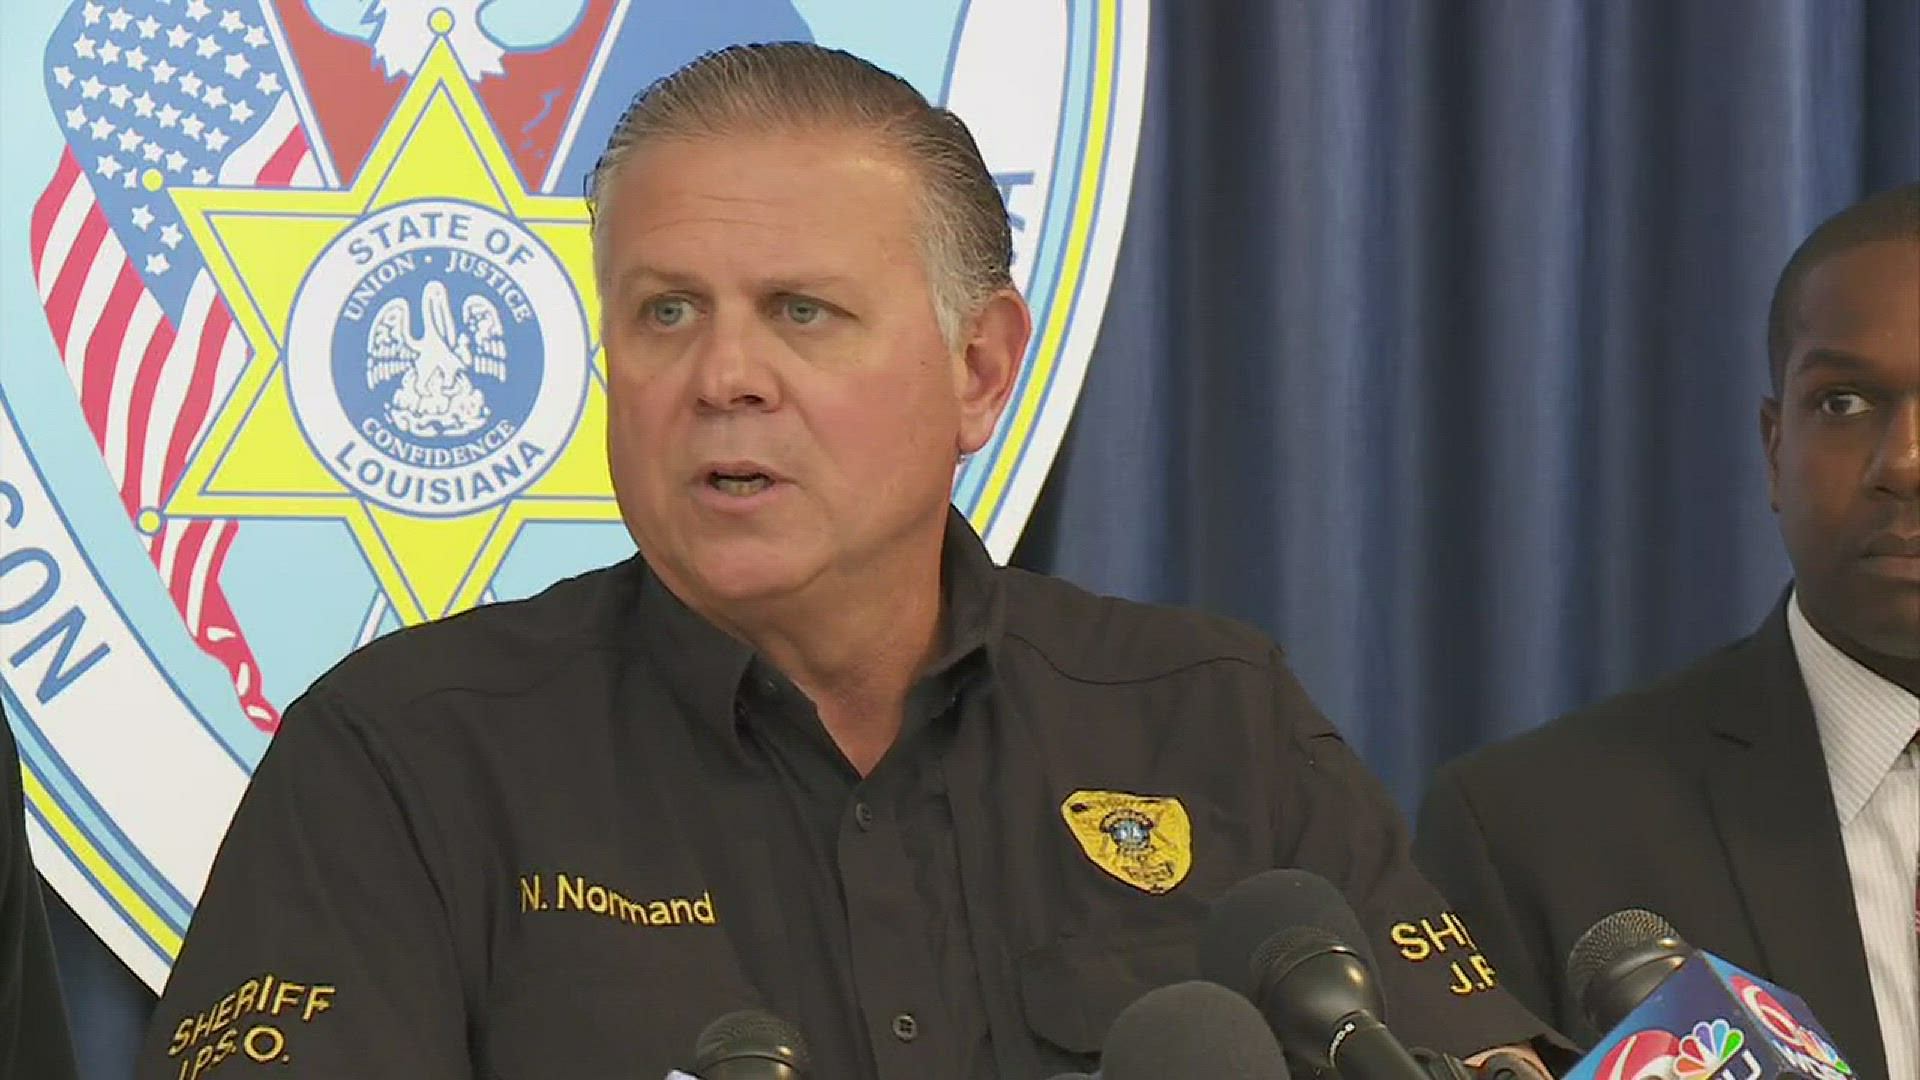 Jefferson Parish Sheriff Newell Normand releases new information, calls for calm from protesters, after the shooting death of Joe McKnight and release of his shooter.